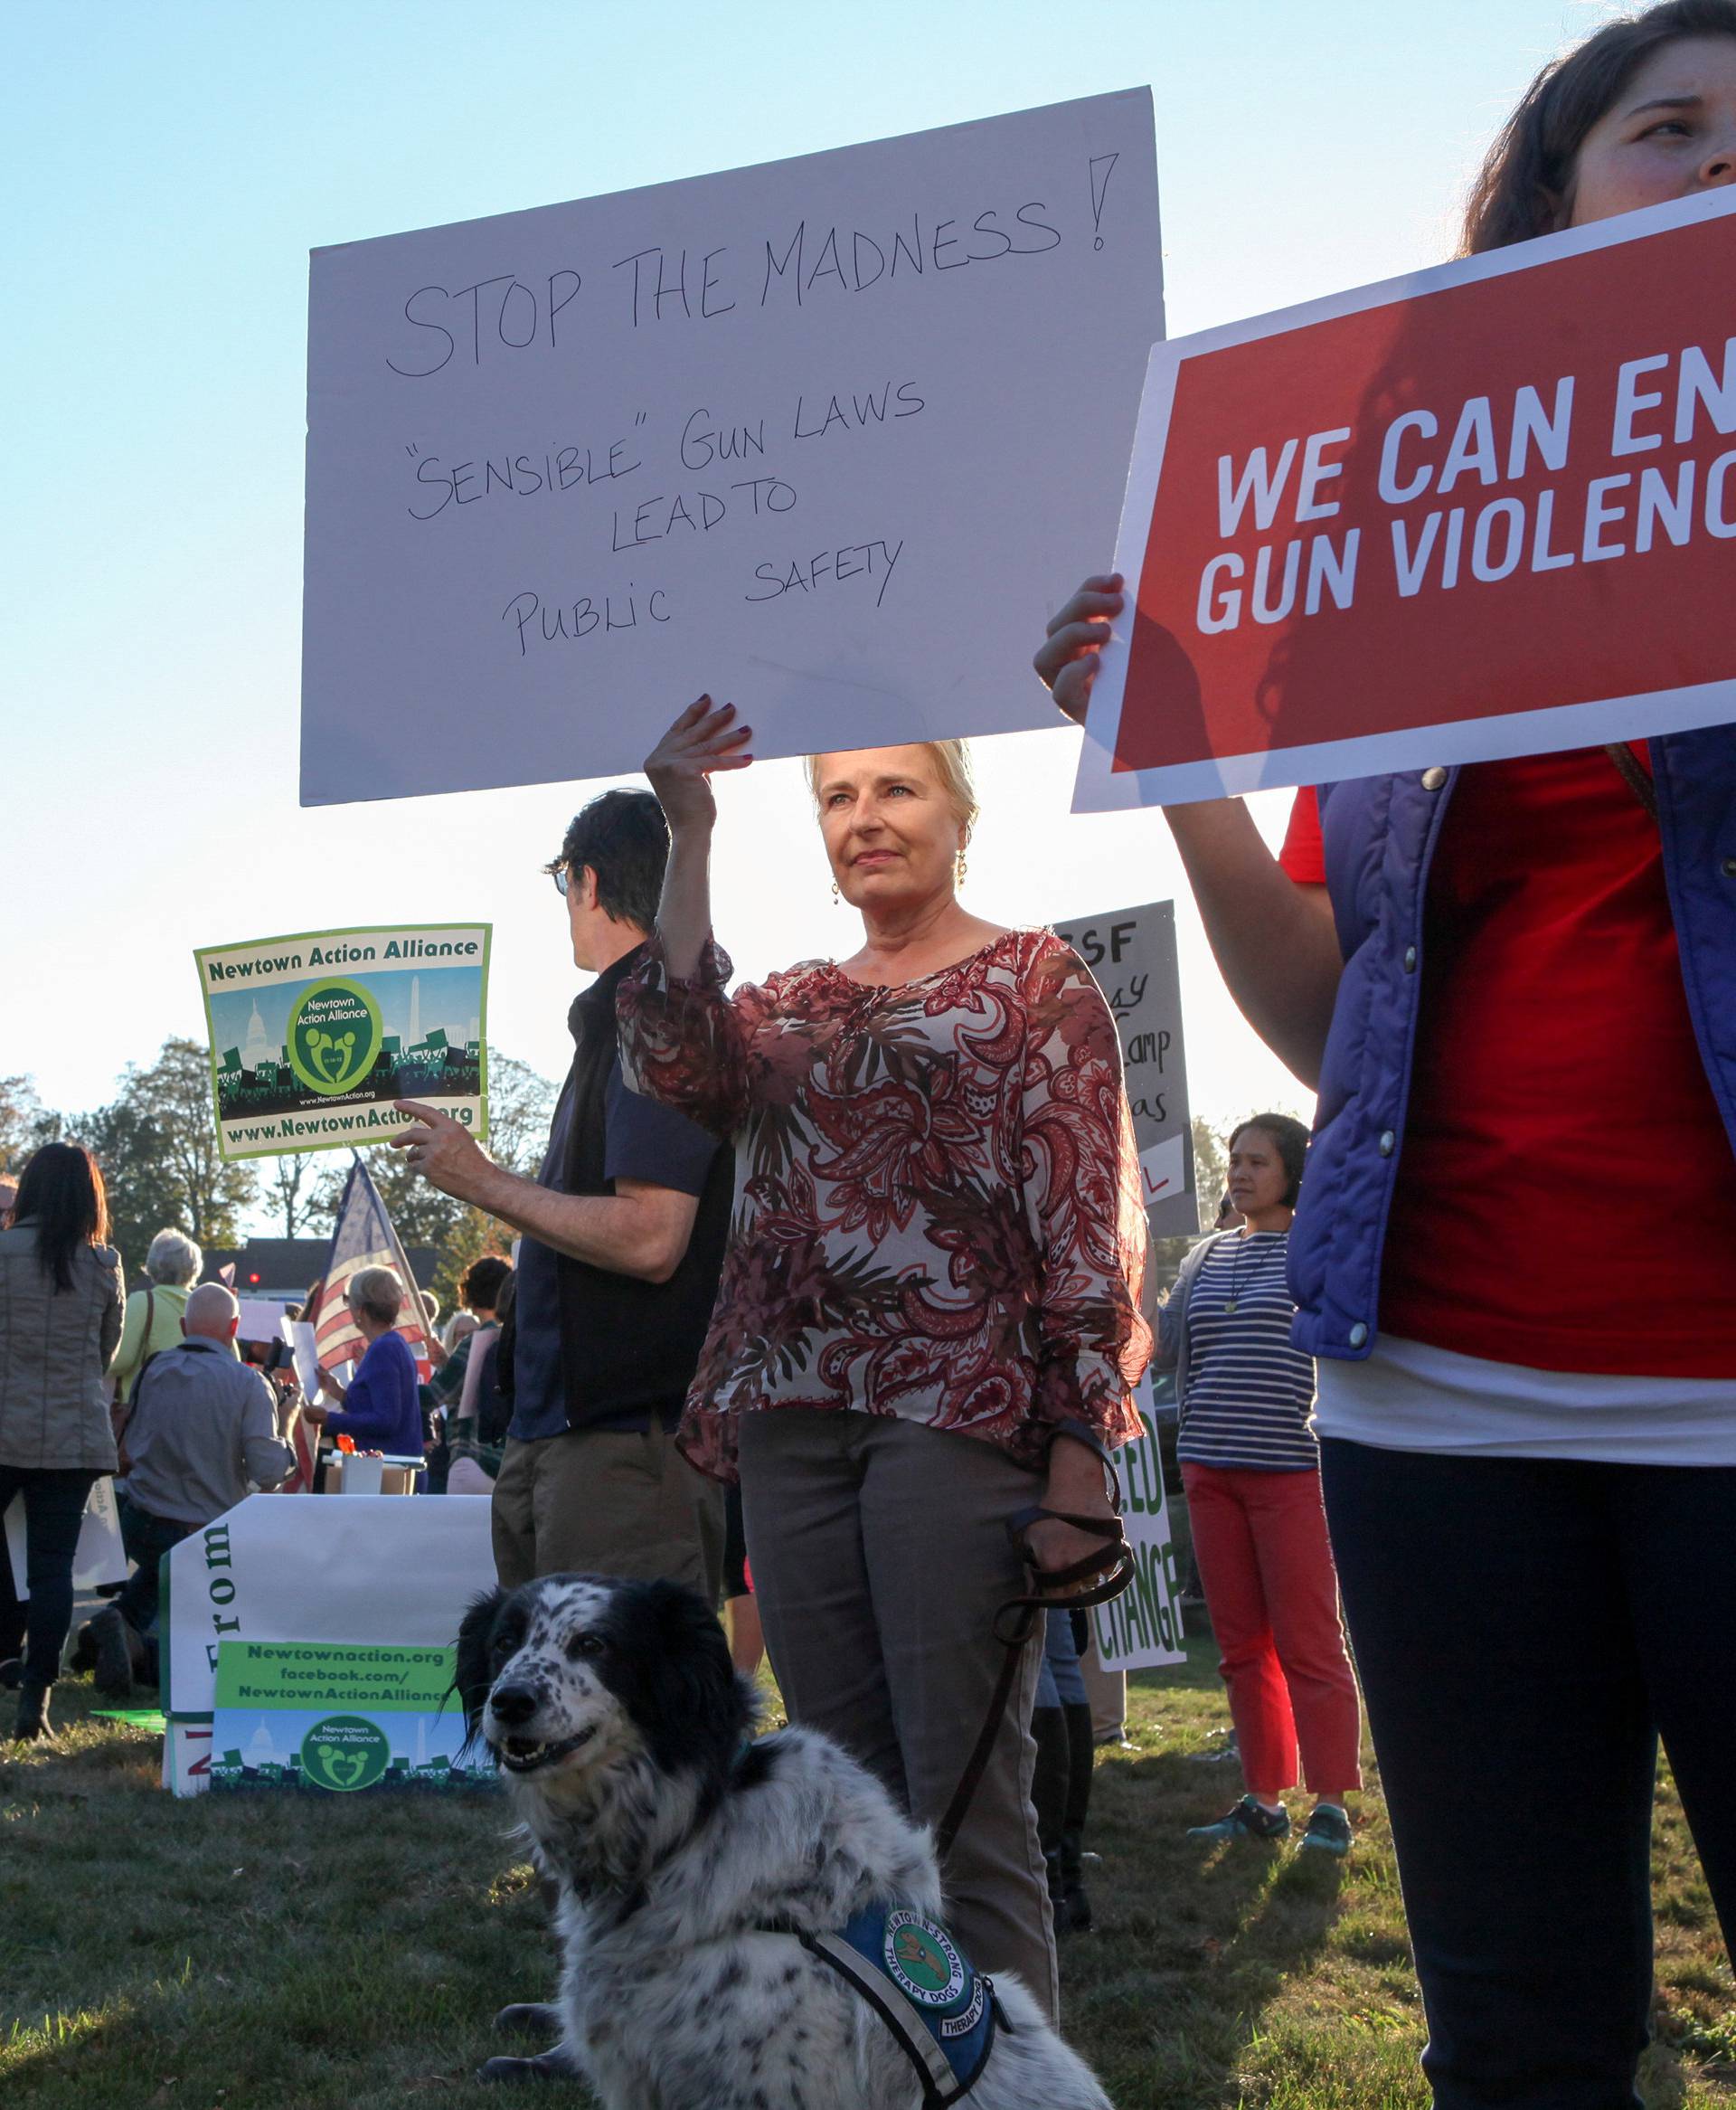 FILE PHOTO: Mourners hold signs during a solidarity vigil in memory of victims of Las Vegas' Route 91 Harvest music festival mass killing, in Newtown